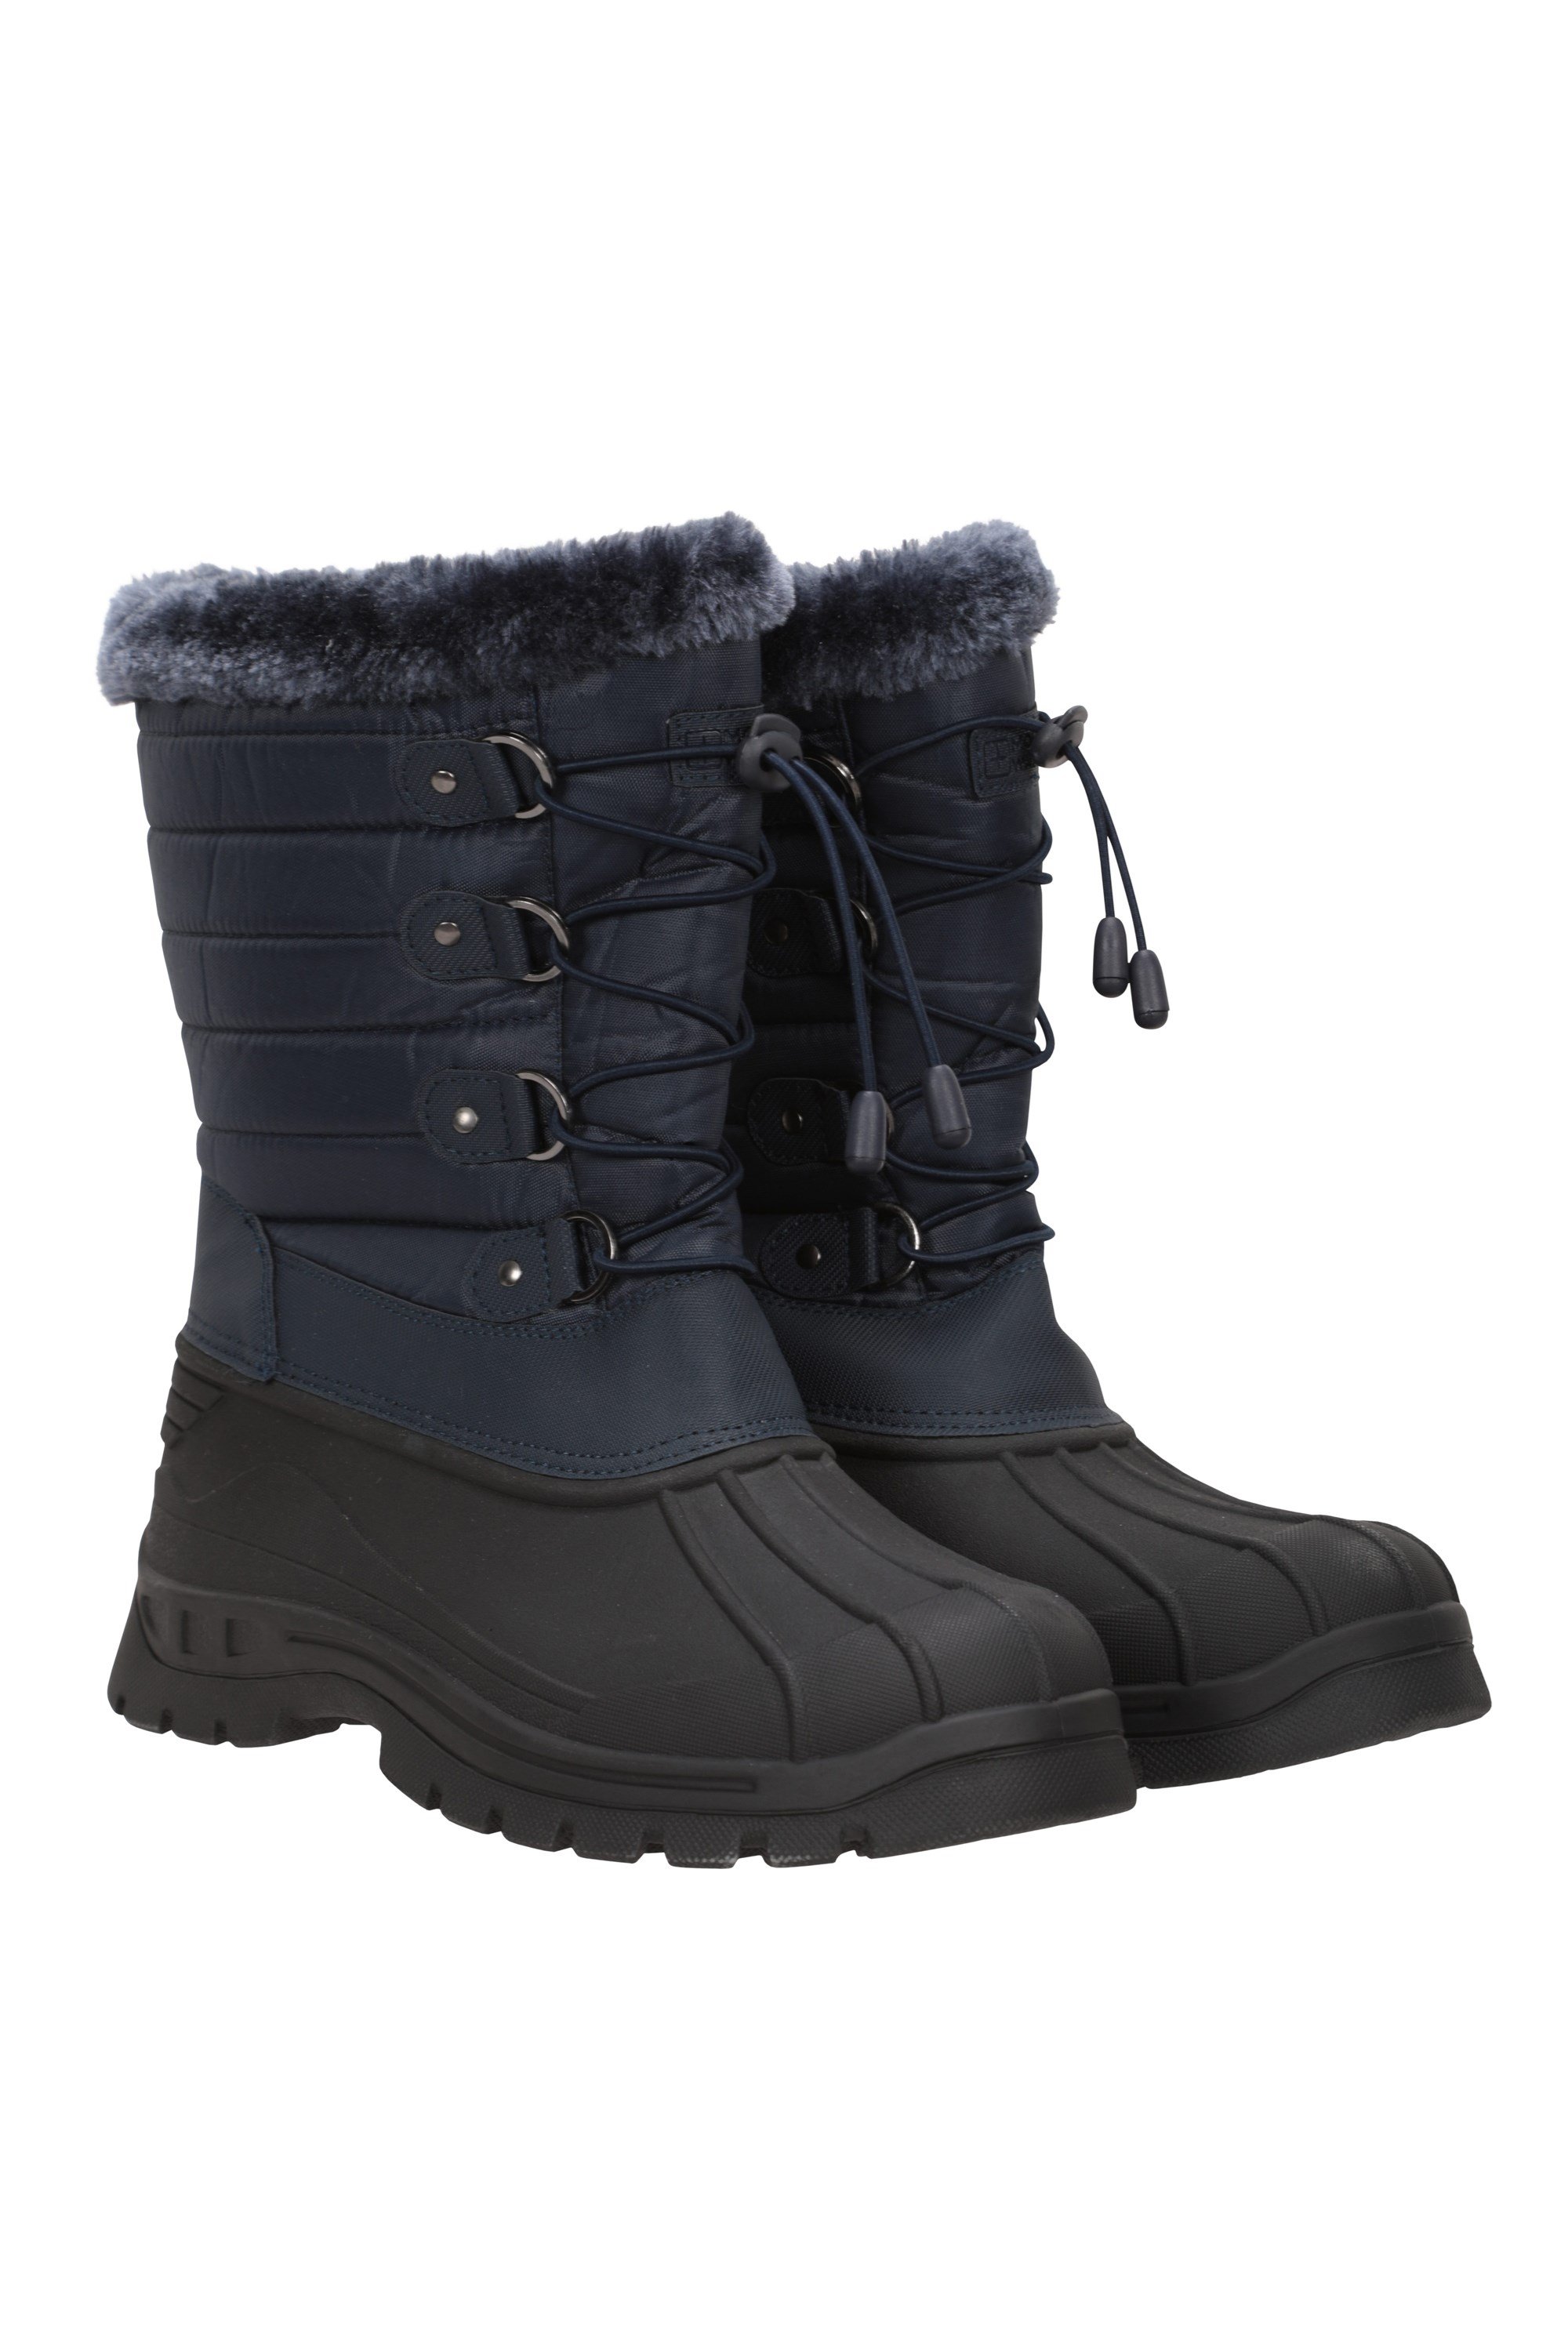 Mountain Warehouse Women's Waterproof Snow Boots Highly Durable and Breathable 